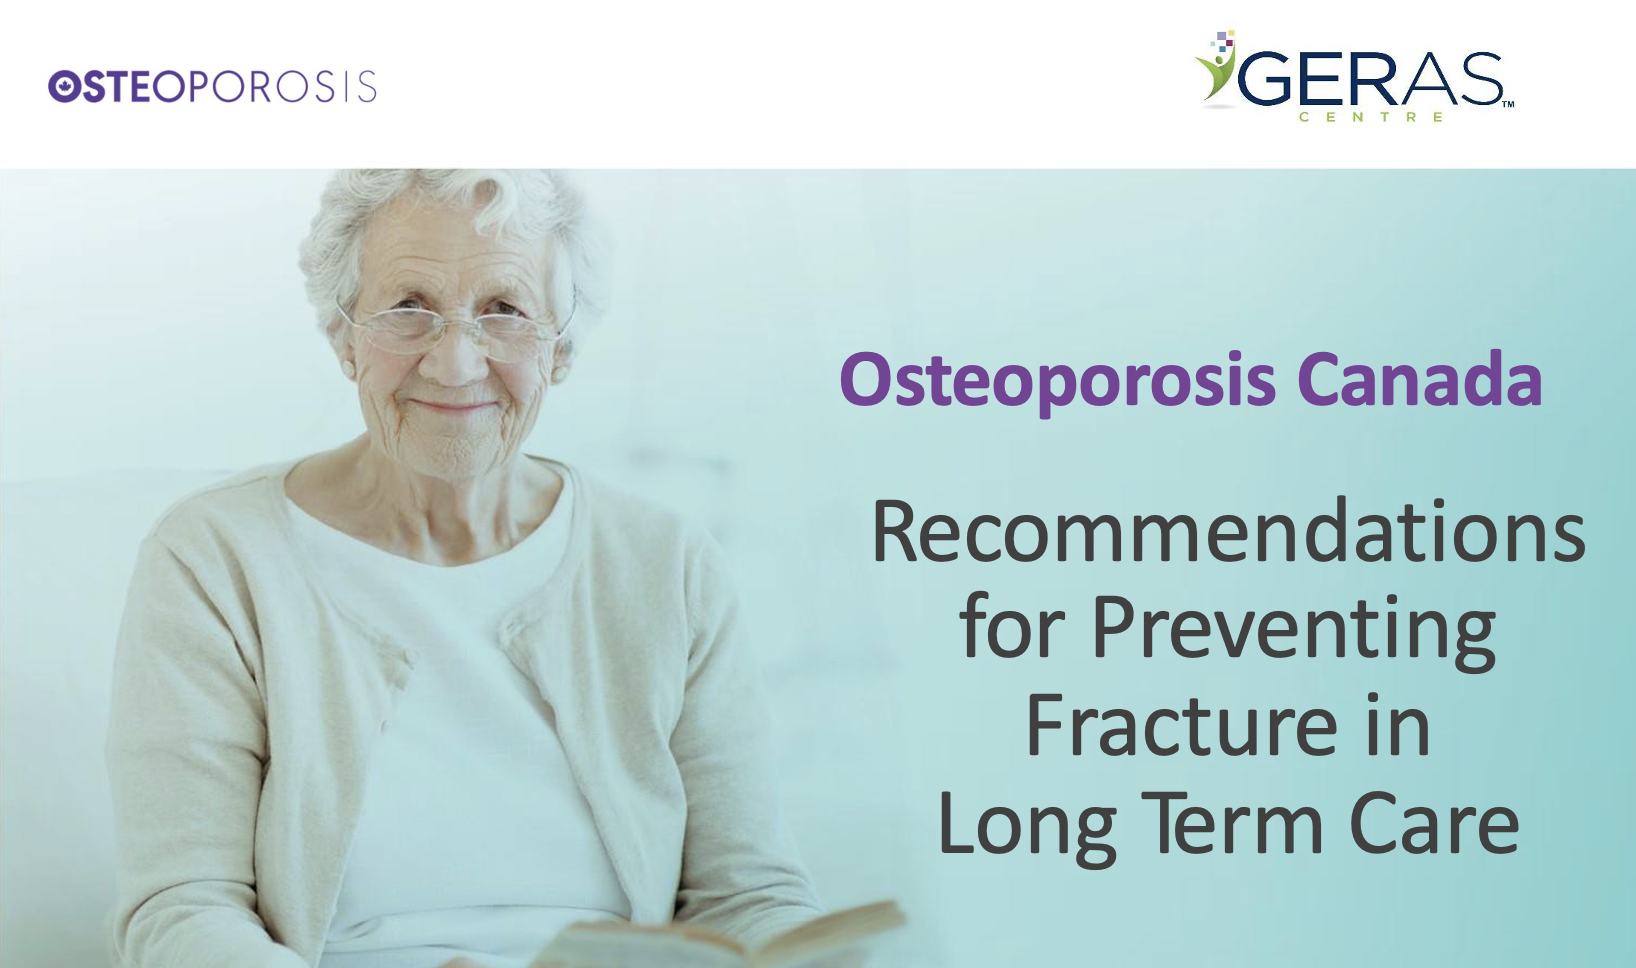 Presentation title slide that reads "Recommendations for Preventing Fracture in Long Term Care"